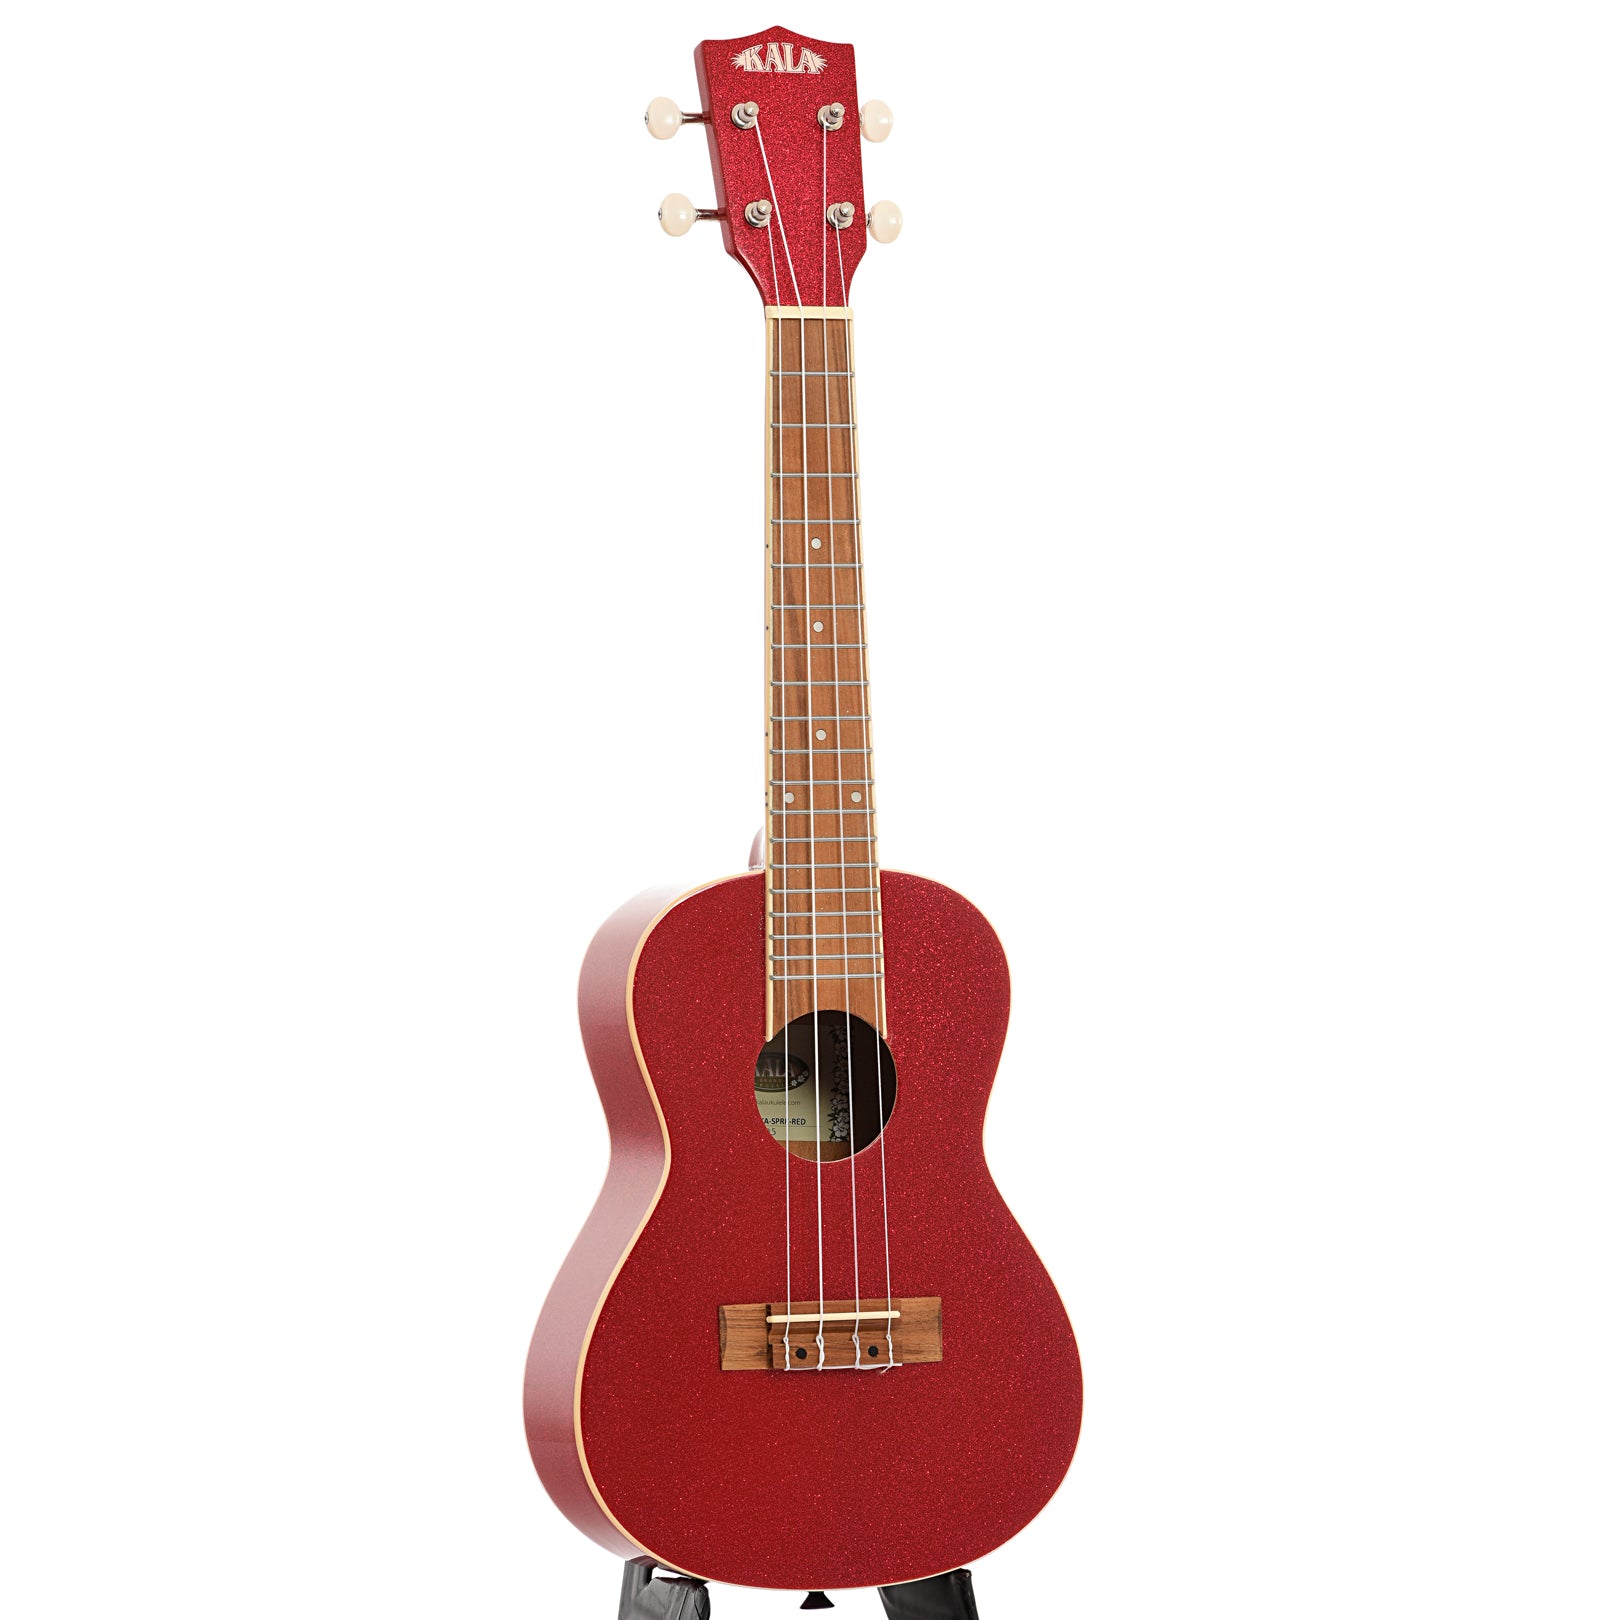 Full front and side of Kala Gloss Sparkle Concert Ukulele, Ritzy Red (recent)